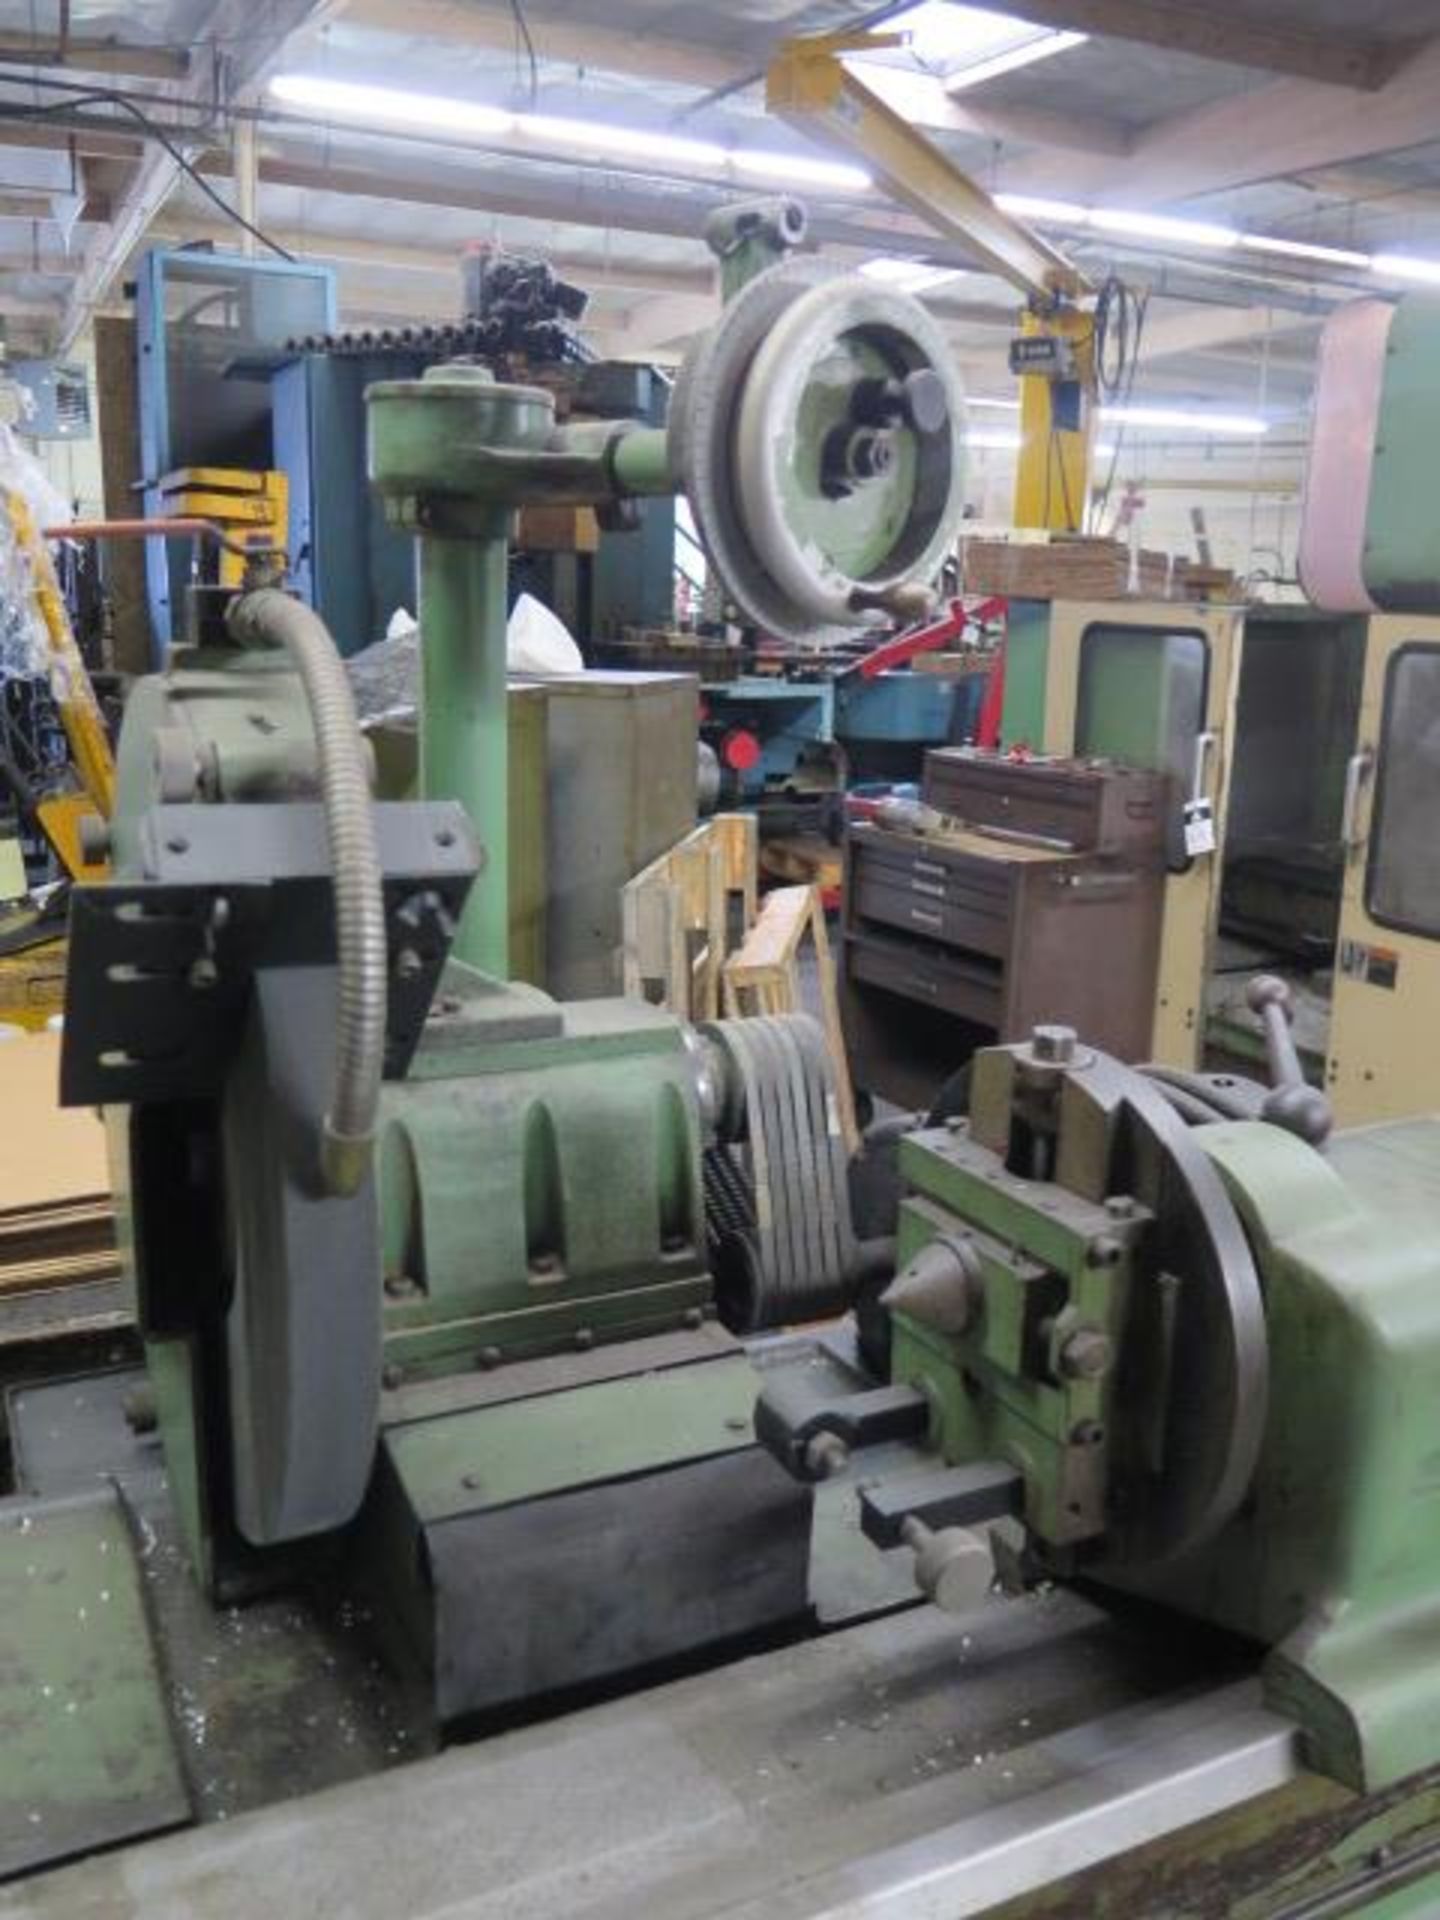 Storm Vulcan mdl. 15 Cam Shaft Grinder s/n 800-76 w/ Motorized Work Head, Tailstock, SOLD AS IS - Image 6 of 16